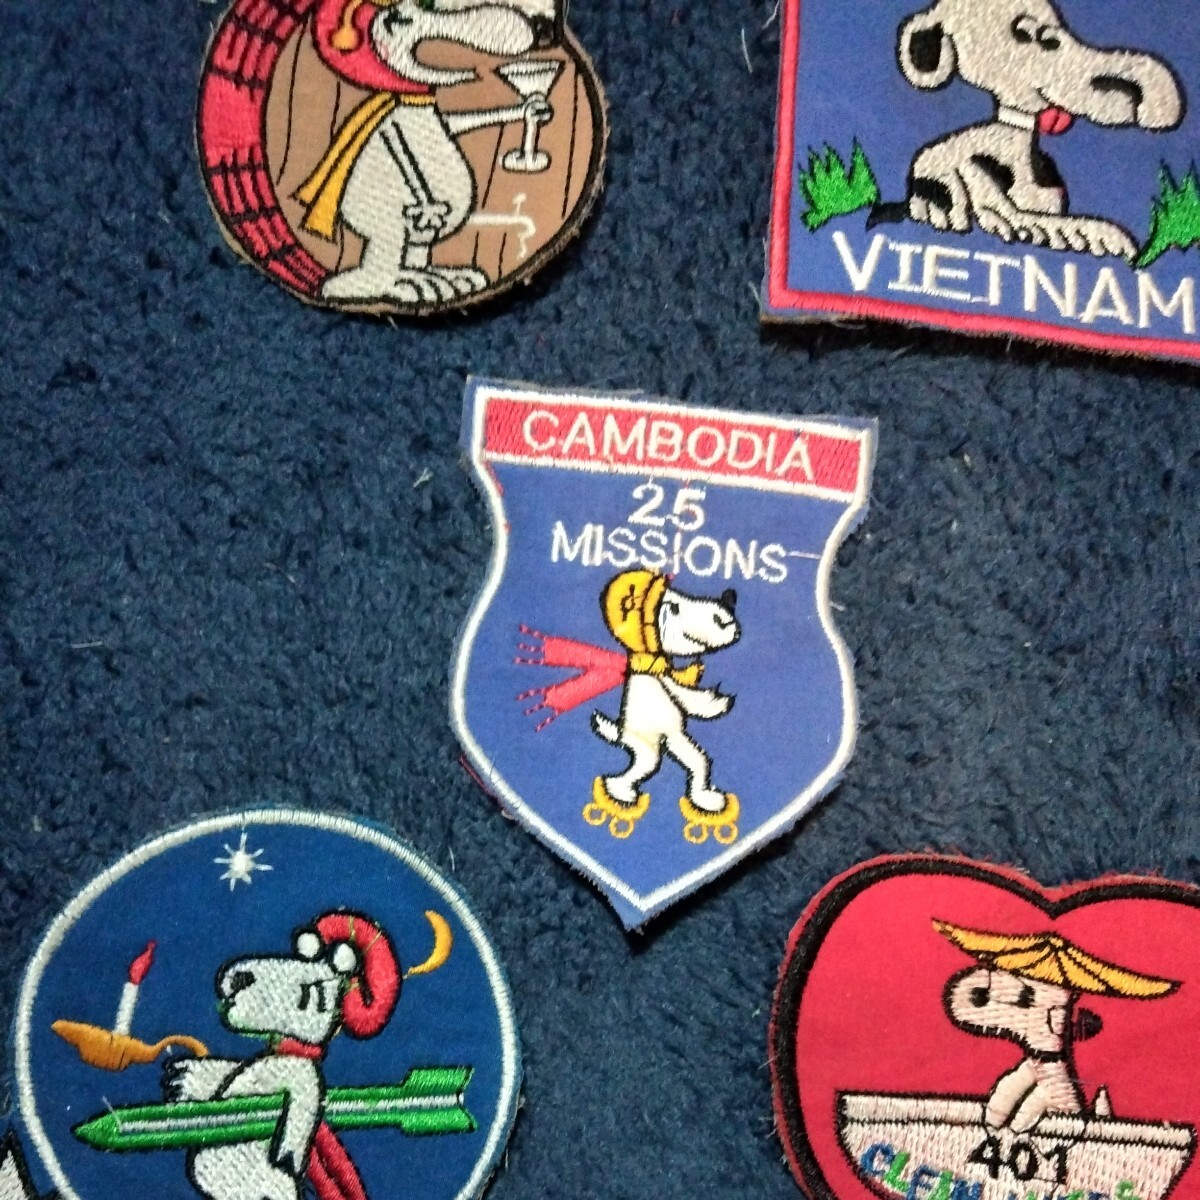  badge American Casual patch war Vietnam embroidery set all part together collection rare hard-to-find custom USA Vintage character 